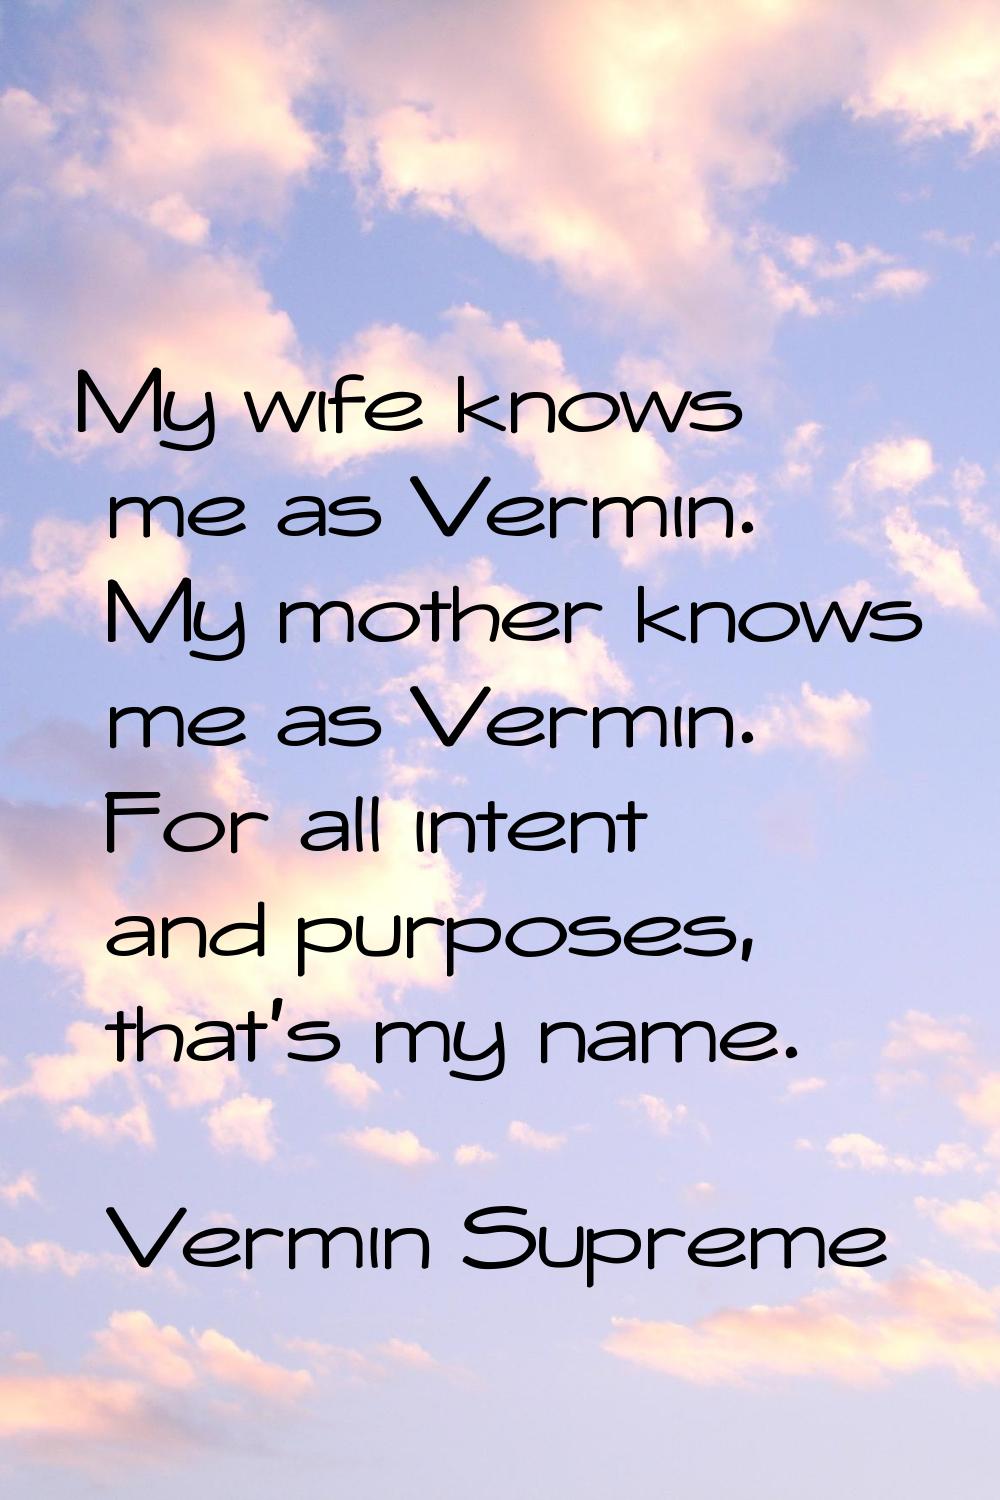 My wife knows me as Vermin. My mother knows me as Vermin. For all intent and purposes, that's my na